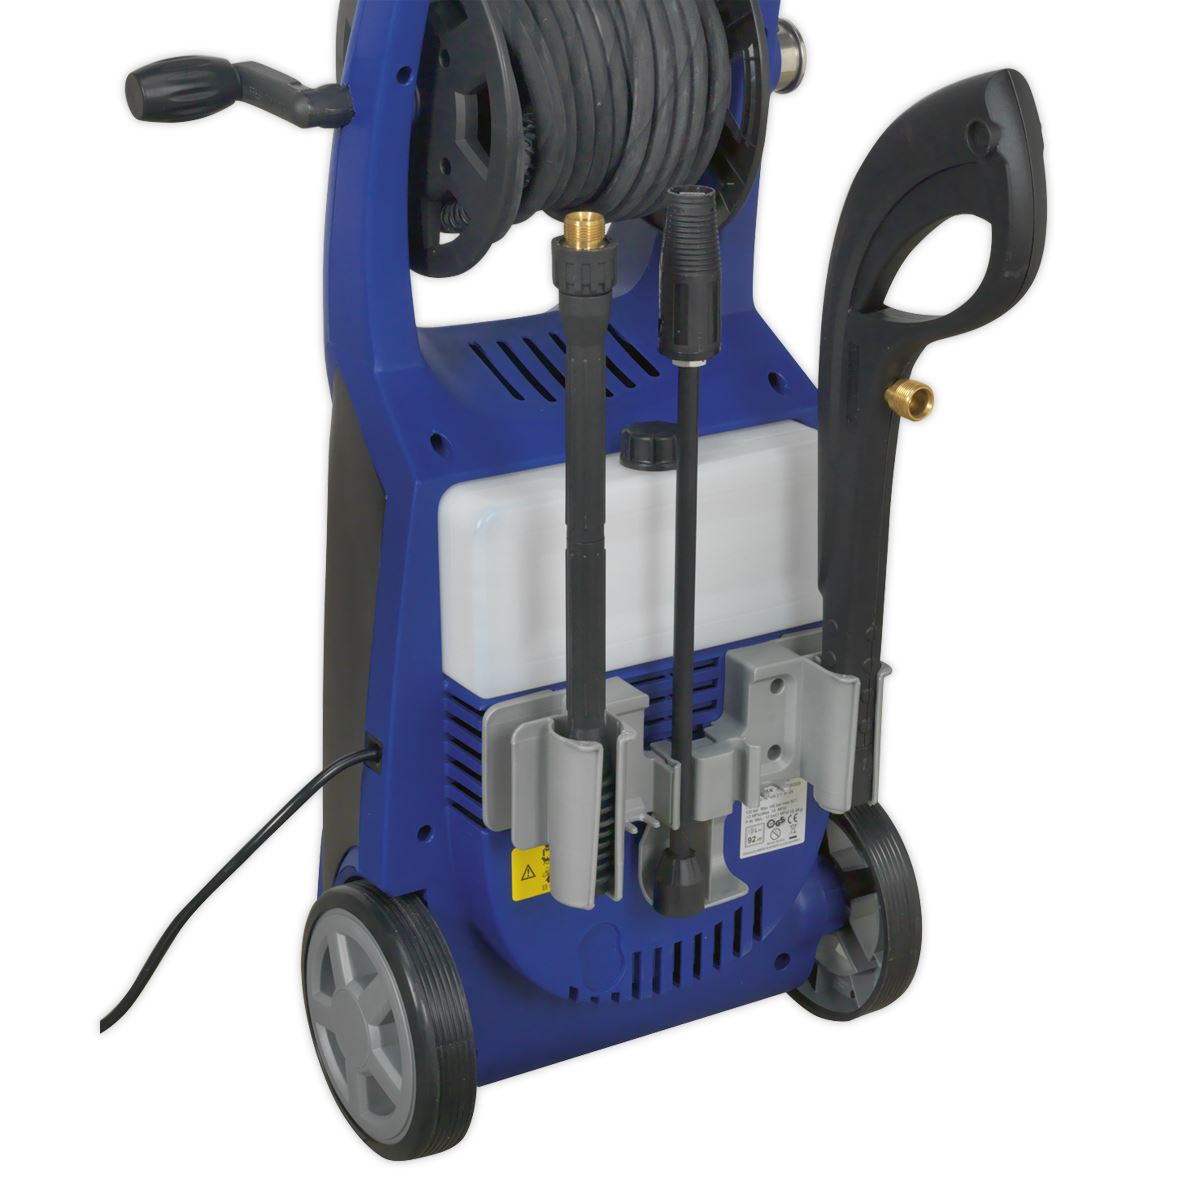 Sealey Professional Pressure Washer 140bar with Accessories